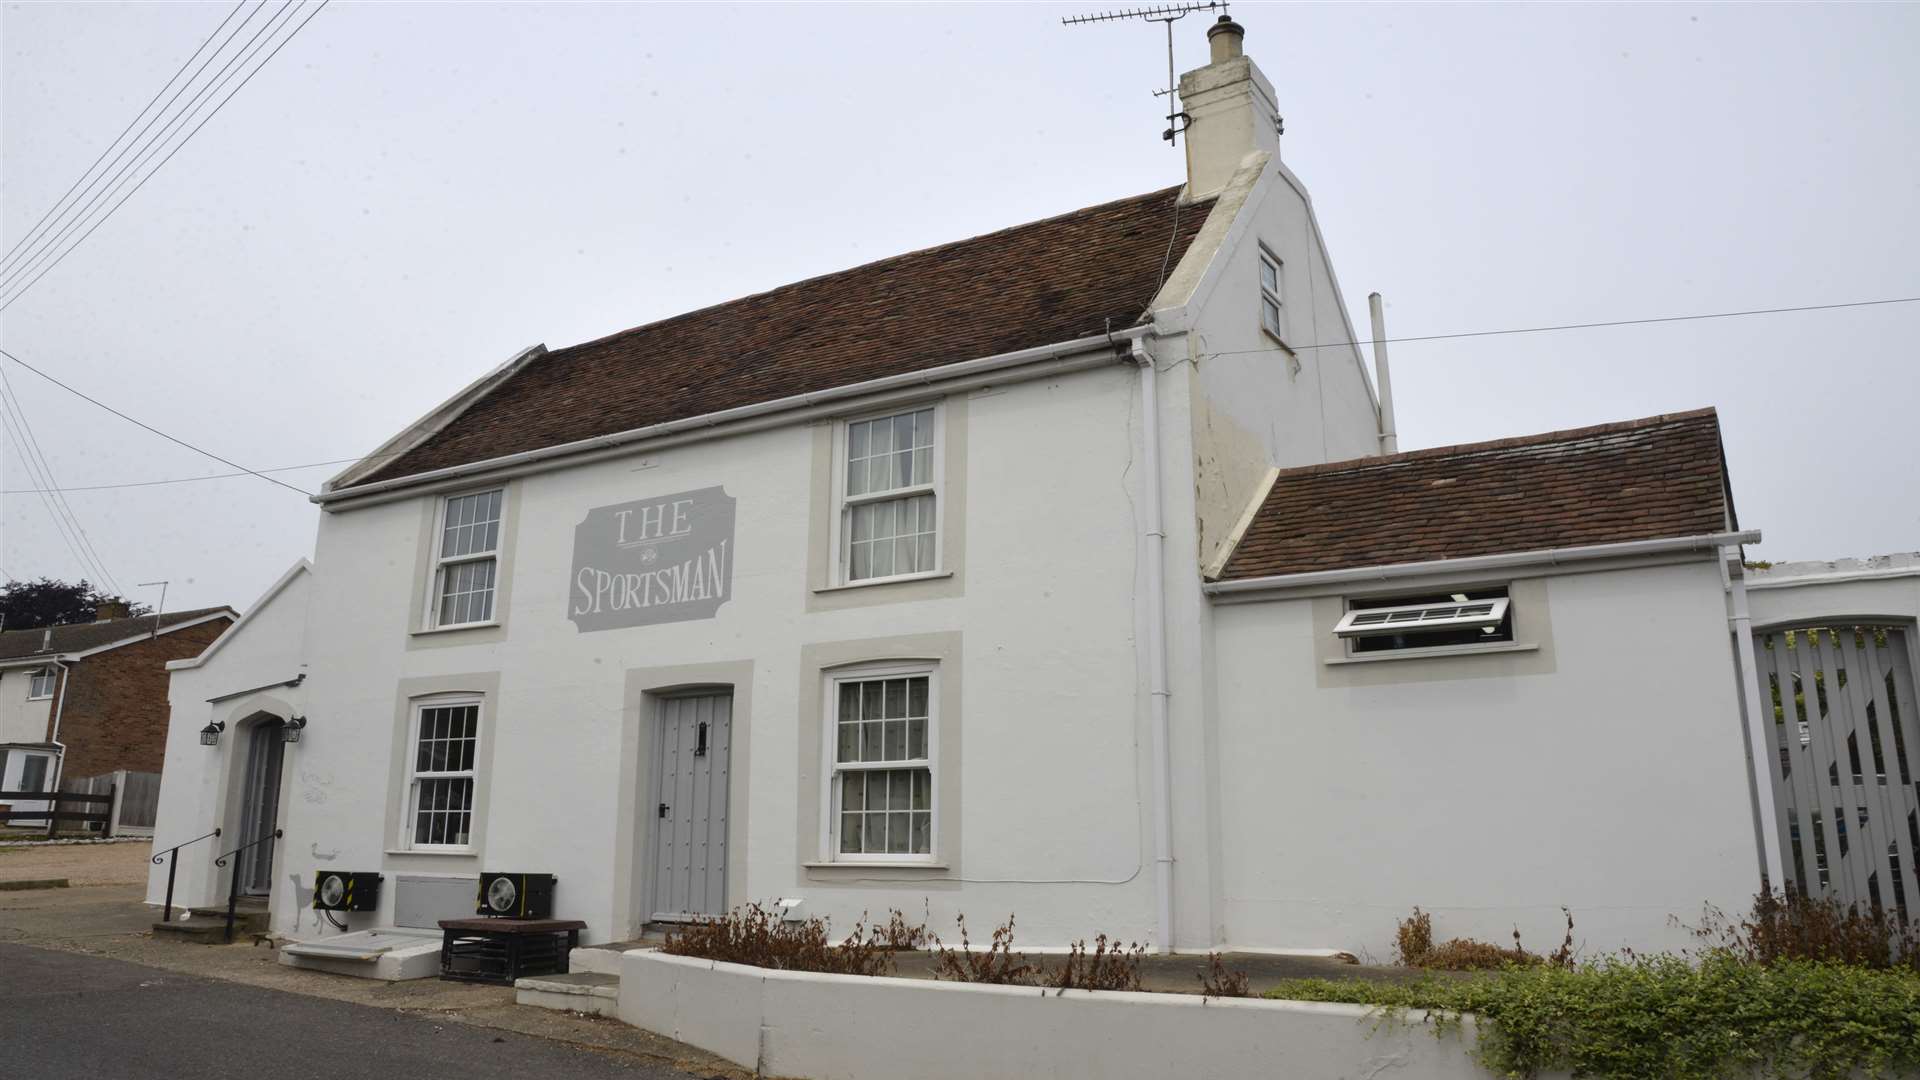 Up for auction: The Sportsman pub, 23 The Street, Sholden, Deal